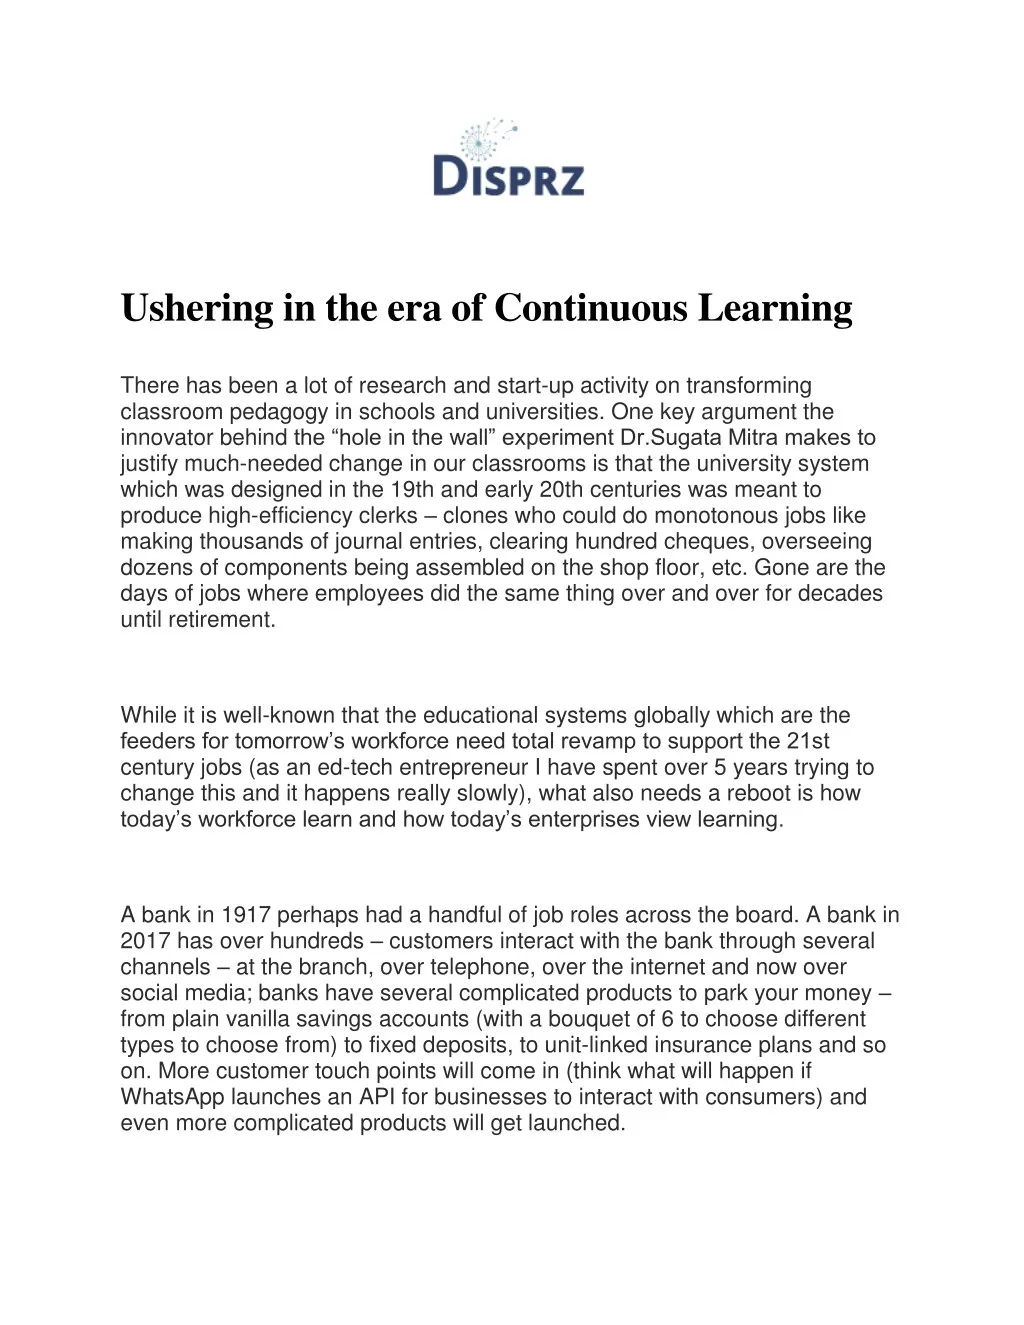 ushering in the era of continuous learning